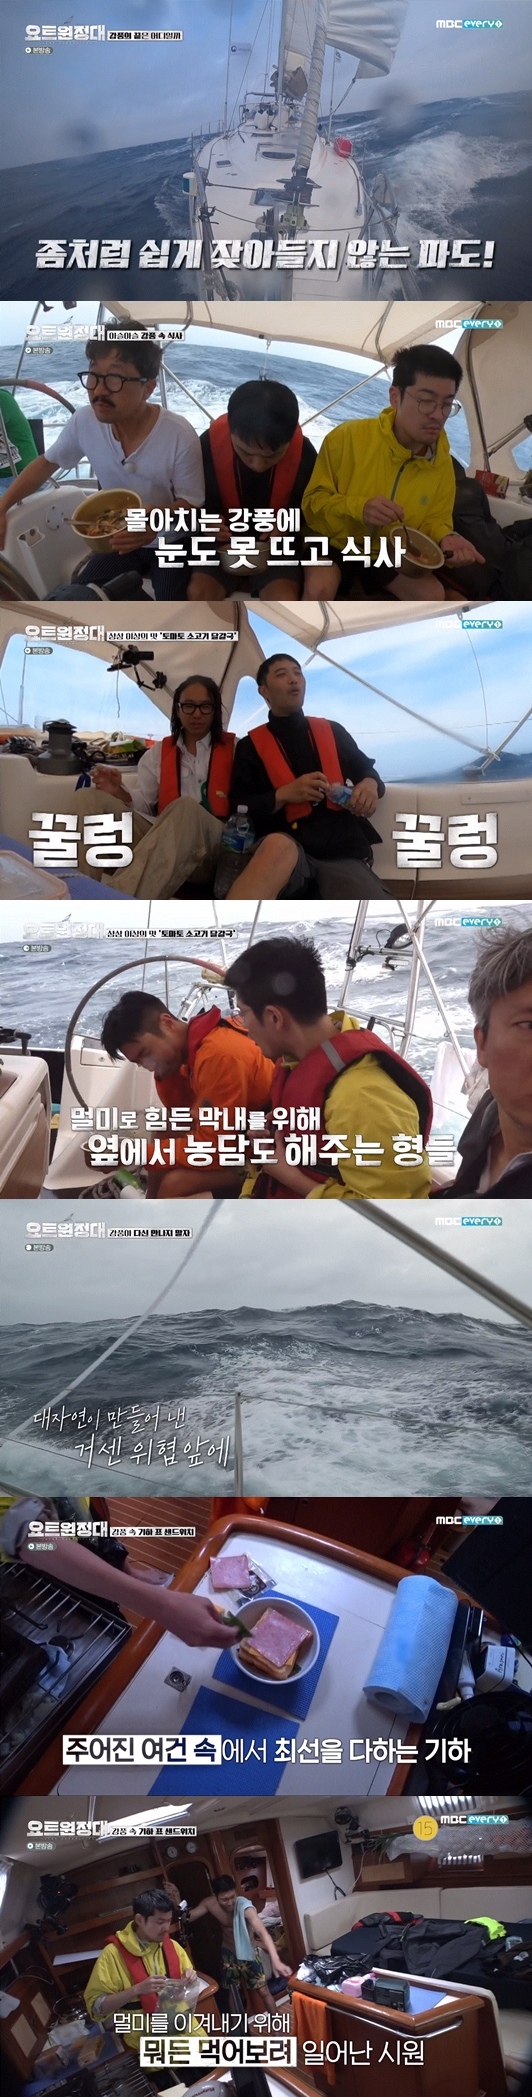 The yacht crews had a conflict, facing the worst of the worst on the sea, eventually stopping Summertime heading for the Southern Cross and turning the bow.On the 21st MBC Everlon Yot Expedition, the 6th day of the voyage, the rough waves were pushed to the extreme, and Jin Goo - Choi Siwon - Chang Kiha - Song Ho-joon was included.Kim Seung-jin Sea captain was preparing for the meal alone because Lim Soo-bin, who was supposed to do the meal on the day, fell down with extreme motion sickness.Kim Seung-jin Sea captain prepared a Tomato beef egg soup in a situation where the ship was shaken so badly that the crew could not shoot.Kim Seung-jin Sea captain was stable in the situation where it was difficult to stand still and cut tomatoes.Chang Kiha went down to watch Kim Seung-jin Sea captain cookThen I ate the tomatoes handed over by Kim Seung-jin Sea captain.Other members who were tired of nausea envied, saying, Chang Kiha doesnt even get nauseous. The members worried about Choi Siwon, who would be fainting in the cabin.Jin Goo said, Why are you a tomato? I vomit, drink and vomit.Jin Goo said, I will be a good tomato today. Chang Kiha and Song Ho-joon barely moved the pot from the shaking yacht.The black waves were threatening to hit the ship. Jin Goo asked Song Ho-joon, Im not in a situation to eat now.When the crew started eating, the waves suddenly hit the yacht. The members holding the pot turned the seawater. Song Ho-joon shouted, Ooh, its salty.Choi Siwon barely came up for a meal after a while; Song Ho-jun and Jin Goo for Choi Siwon, the waves kept the calm spot.Choi Siwon appealed, It feels like Im back on my first day. When Chang Kiha said, I dont get sick, Choi Siwon envied, saying, My brother is chosen.Kim Seung-jin reassured the crew, saying, We will not meet again todays strong winds. Jin Goo said, I do not want to see him again.Just do something about him, he told Kim Seung-jin Sea captain.I thought at first I was just going to be on a boat, but I dont think its that easy, Chang Kiha said.Ive never had a moment of easy time, Jin Goo said.Jin Goo and Choi Siwon confided in their honesty at night: This is really my figure, talk a lot and I notice a lot.It is so awkward because it is the first time I have seen my real appearance in front of the camera. Chang Kiha said, When I look at my brother, I talk comfortably at some point and at some point I seem uncomfortable. I had a look at my brothers face that this situation was uncomfortable.Chang Kiha prepared breakfast the next morning, and in the stomach, which was hard to stand still, Chang Kiha pulled out the ingredients and even collapsed the cups and bowls.Chang Kiha managed to take out the bowl and prepare the ingredients.Chang Kiha said, I made it because I had to eat rice. I cooked it because I just packed the raw ham and cheese on the raw bread.I put on the sesame leaves somewhere. Jin Goo said, Geometry made bread in the storm. Thank you for geometry.To Chang Kiha, the crew continued to praise: Its the best sandwich of my life, Song said.Chang Kiha said, As we met the strongest waves after the voyage, the members faces began to get darker and darker. This is the first time that I heard that this seems a little bit less.I lost contact with the support line. Kim Seung-jin did not receive the call from the support line properly.It was because the voice was not heard well and the quality of the call was not good enough to keep disconnecting.The expeditionaries, who were in the greatest crisis ever, were helpless in the increasingly tilting yacht swept by huge swaths.Kim Seung-jin said, Dont worry about the support line, lets go first and come up. Why dont you achieve your purpose quickly?Chang Kiha hesitated and asked Careful, Are you taking it? I hope you do not take it.Chang Kiha also said, I understood that it is a situation where I can take a conversation for 5 minutes to 10 minutes.Chang Kiha then suggested that Carefully modify the goal, saying, We dont have to go to the first set of goals. Jin Goo said, I have a sorry heart and a heart that I lost.I hope others do not think so, and I want you to get up on your knees. Kim Seung-jin Sea captain then said, We didnt lose. Song Ho-joon, who was always pleasant, eventually poured tears.Song Ho-joon said, I hope that it will be a situation where I can overcome the situation that I have become sensitive and can laugh quickly.I hope that whatever it is, I will not be able to eat and feel awkward.I actually think its bigger that weve entered the South Pacific here than were in a rush when we look at the former South Cross, Choi Siwon said.Song Ho-joon said, The viewers seem to have a goal if they are in the south cross, but it is too hard because we are not going to the land in our position. I do not think only those here know how hard it is to go toward something abstract.Its not easy to go back because weve already come a long way, Kim Seung-jin said, a situation where forwards and abandonment were not easy.Sea captains heart, which first learned the inside of the crew, also became heavy.Kim Seung-jin Sea captain eventually decided to return - but the crew didnt say anything to such a decision.Kim Seung-jin Sea captain said, I decided to return to this place and go back to Marado and enter the southern coast via Jeju Island.Chang Kiha said, I am sorry that one thing that I have on my mind is our weakness ??? I scratched the door on Sea captains Pride.Kim Seung-jin told the crew, How about going back, its okay.Kim Seung-jin Sea captain made kimchi for the hard-working crew and the filming team. Song Ho-joon said, The truth is, it will be the most painful.Song Ho-jun said, Sea captain is great. I kept laughing. Of course he was sorry. Ive never turned my ship in my life.In that situation, I would have said that I would not shoot, but I prepared Kimchi so delicious. Jin Goo said, Its the day I decided to return. My heart would have turned over like a kimchi.But to make us feel a little comfortable in that situation, the warm heart of the Sea captain.My heart would have collapsed a lot, but it was still a difficult situation. He gave us kimchi for us. He tasted it, but his heart seemed to be more delicious. 